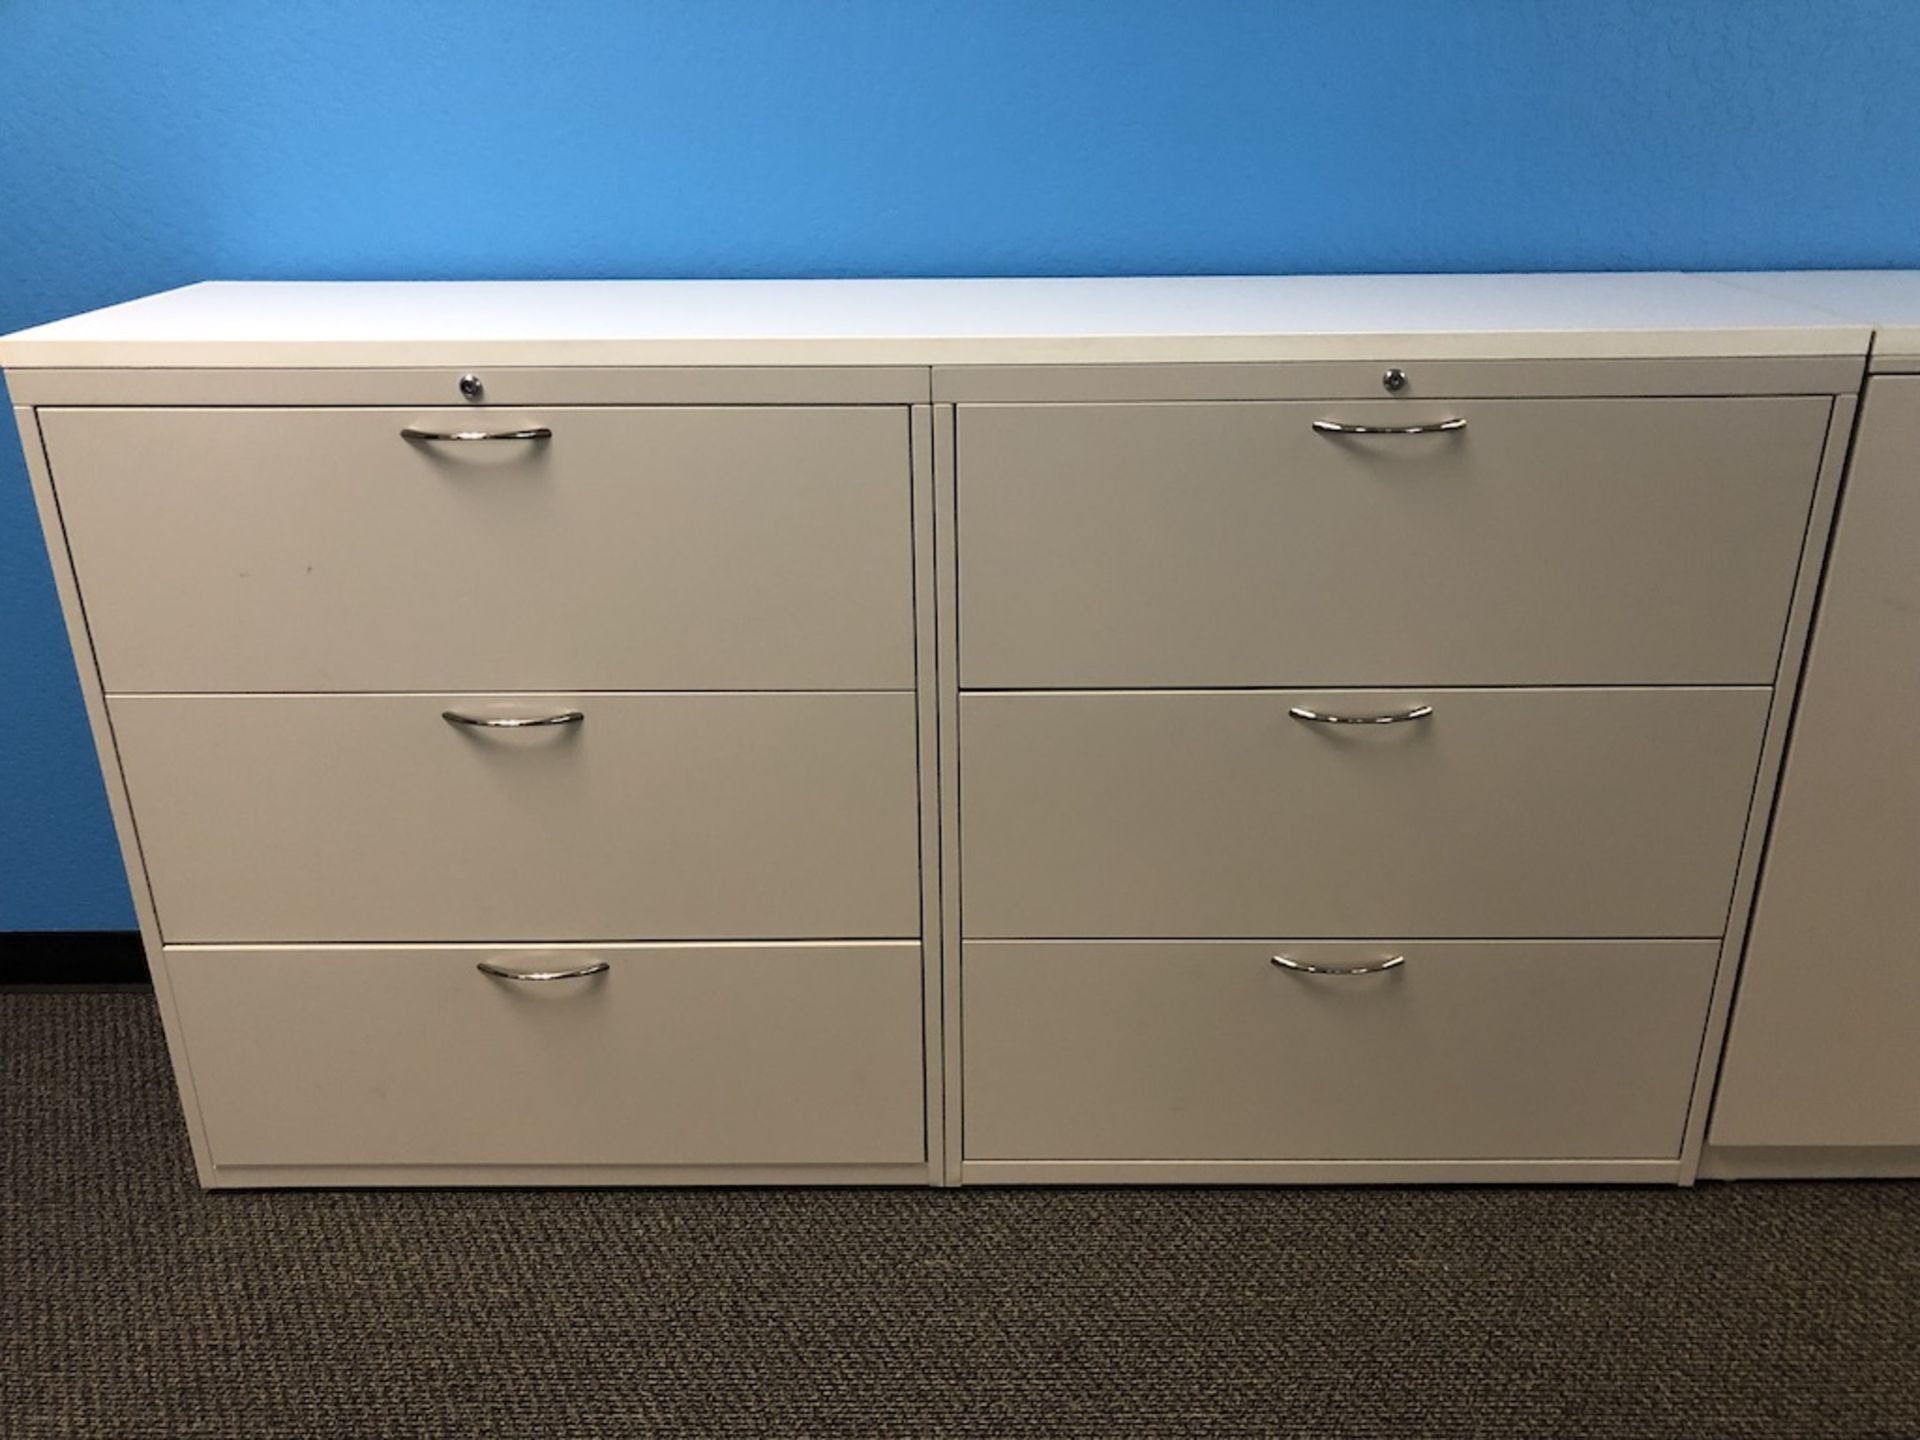 6 DRAWER OFFICE CABINET 6FT L X 18IN W X 41IN H   SCHNEIDER ELECTRIC- 6611 PRESTON AVE SUITE A - Image 5 of 5